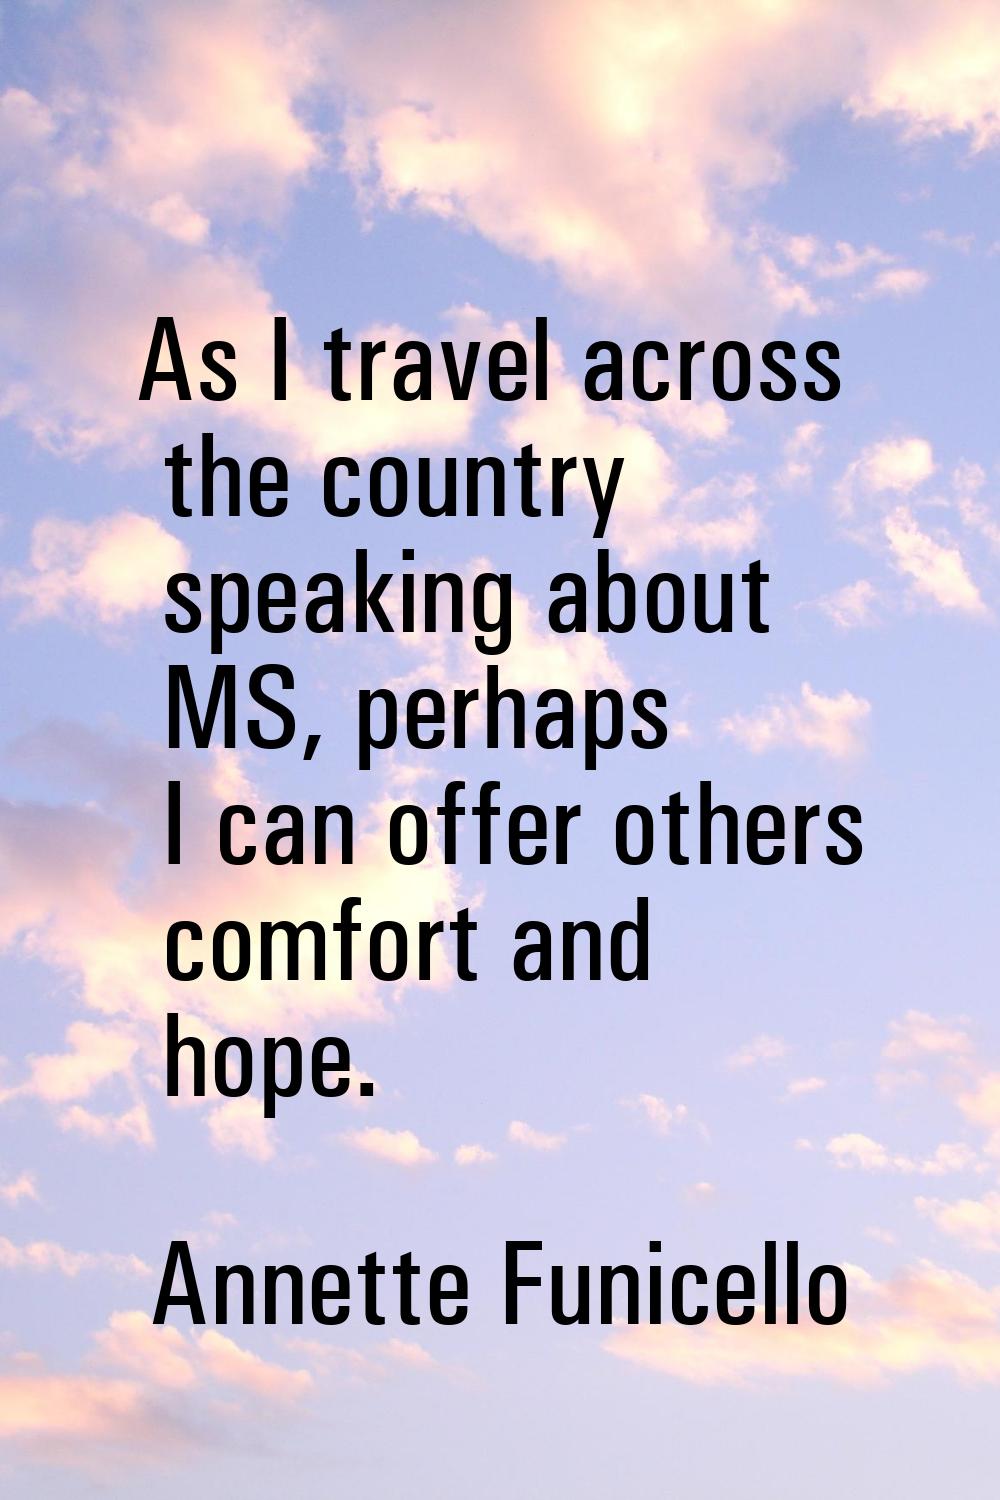 As I travel across the country speaking about MS, perhaps I can offer others comfort and hope.